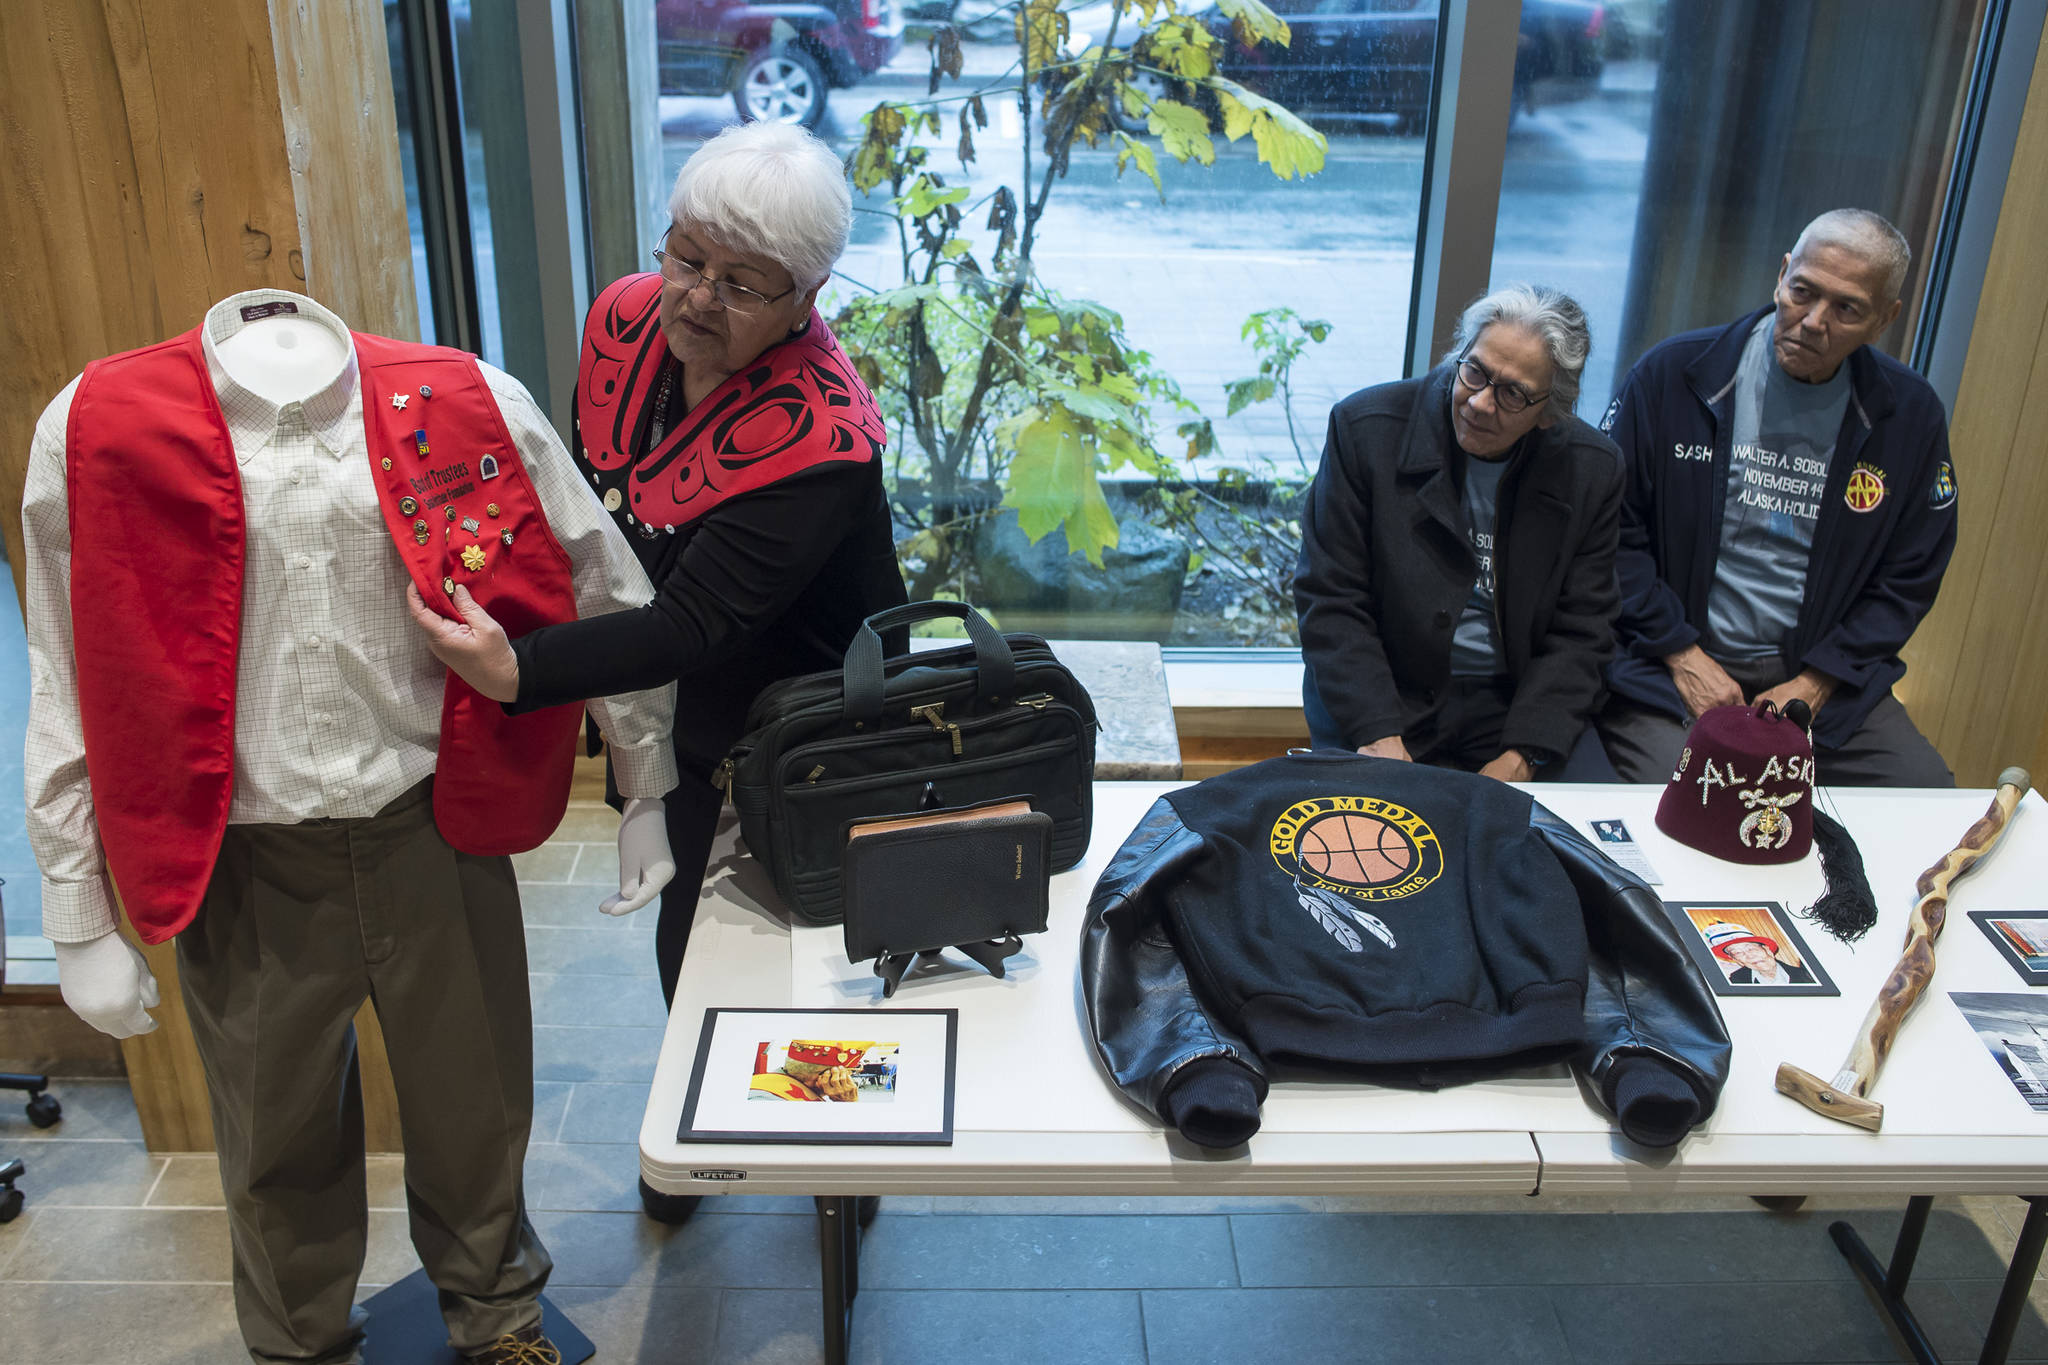 Janet Burke talks about some of her father’s things on display at the Walter Soboleff Center as her brothers, Walter Jr., center, and Sasha, watch on Wednesday, Nov. 14, 2018. Nov. 14 was named Dr. Walter Soboleff Day by the Alaska Legislature in 2014. (Michael Penn | Juneau Empire)